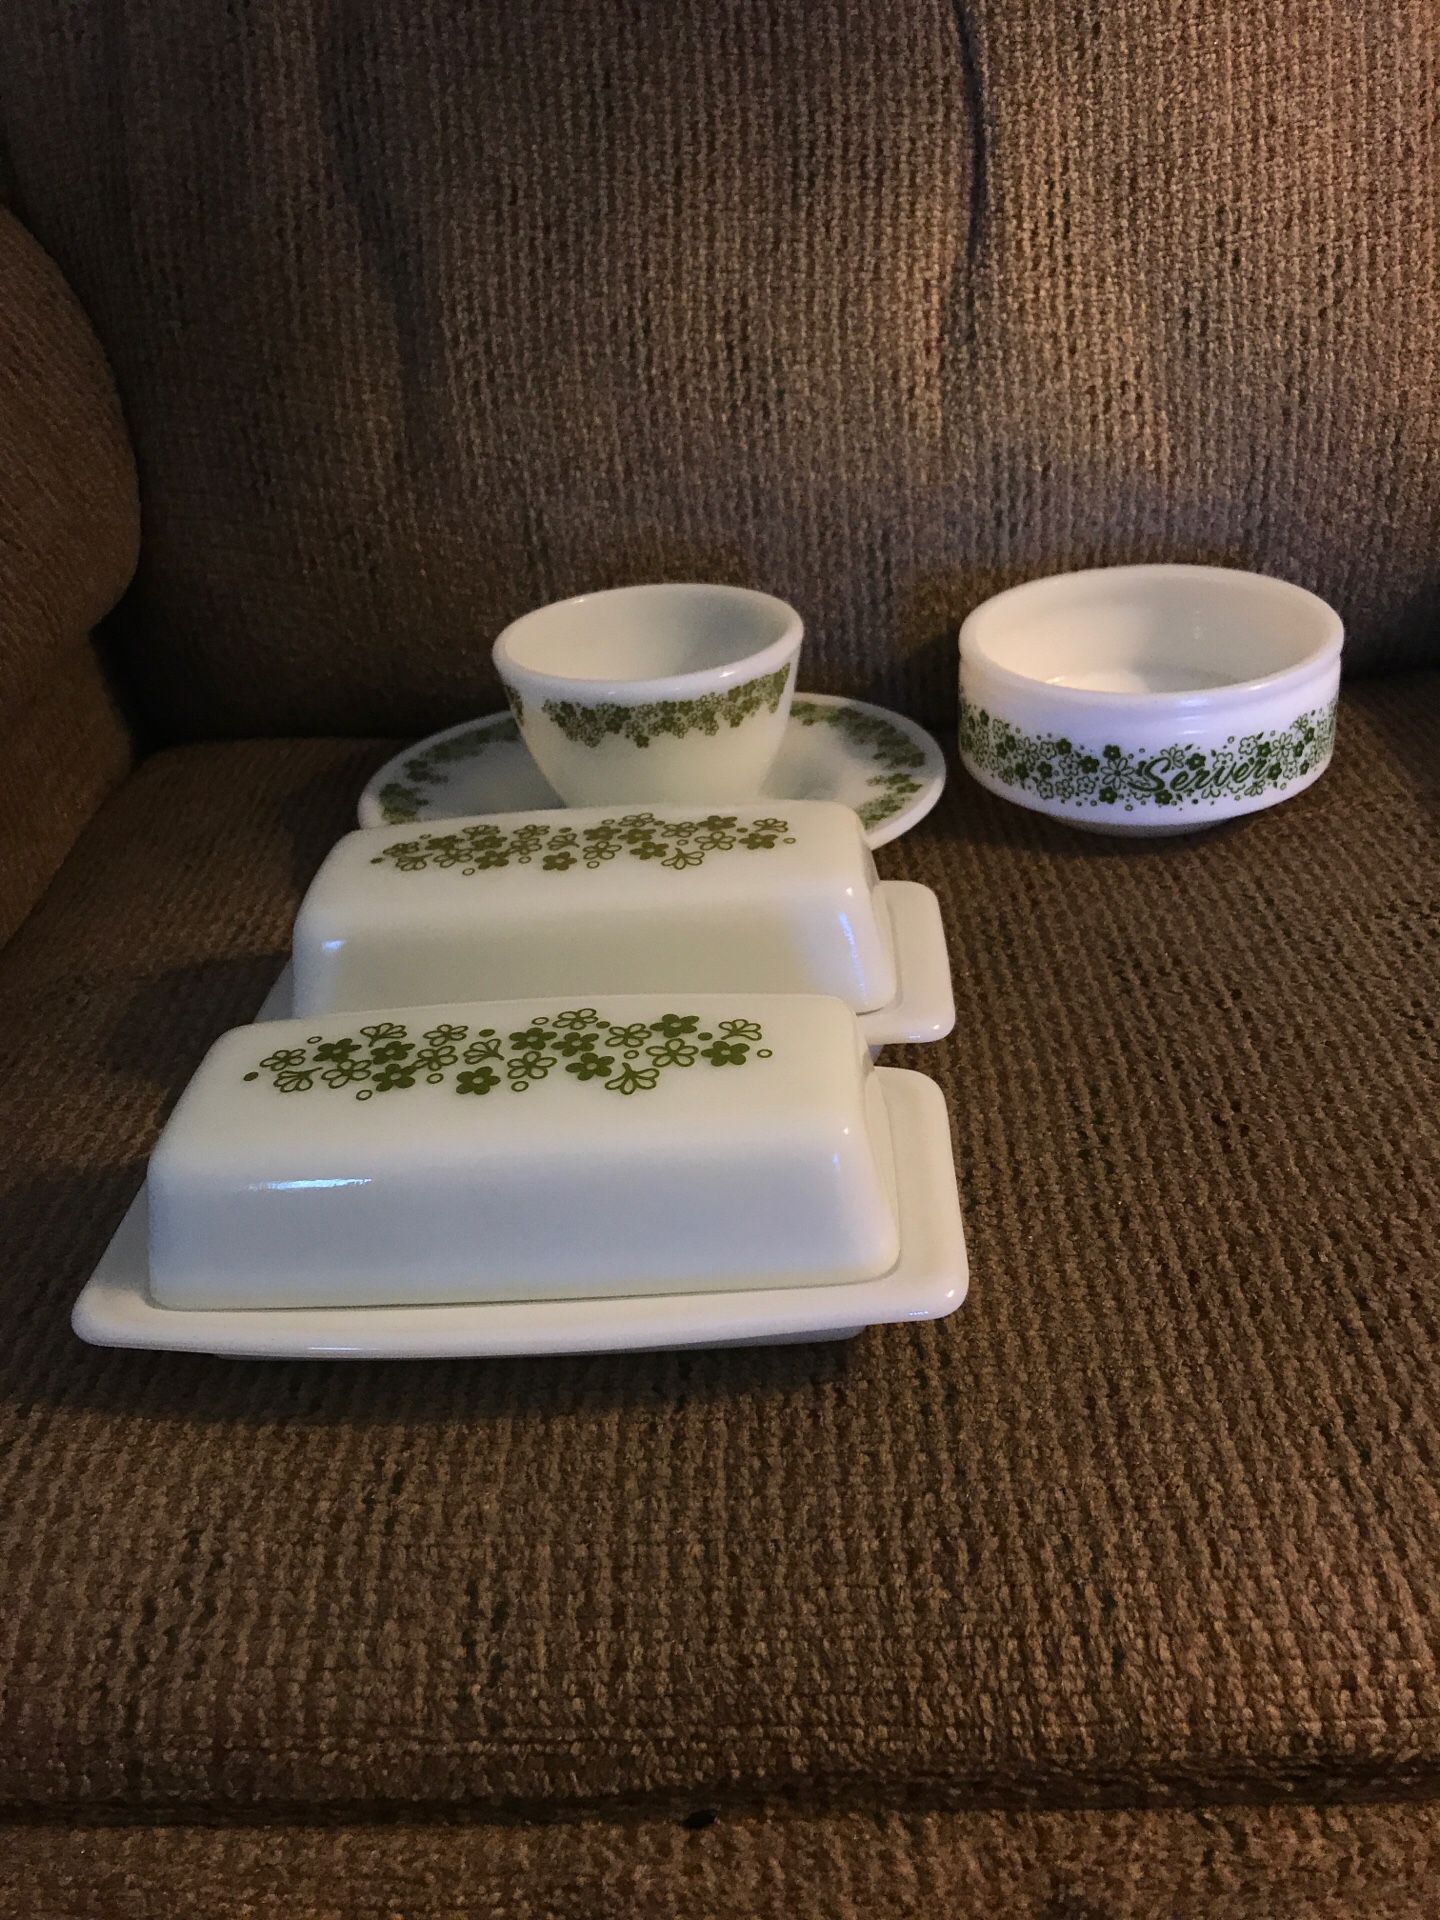 Pyrex Spring Blossom Crazy Daisy Butter Dishes, Gravy Underplate, Sugar Bowl and Gemco Server